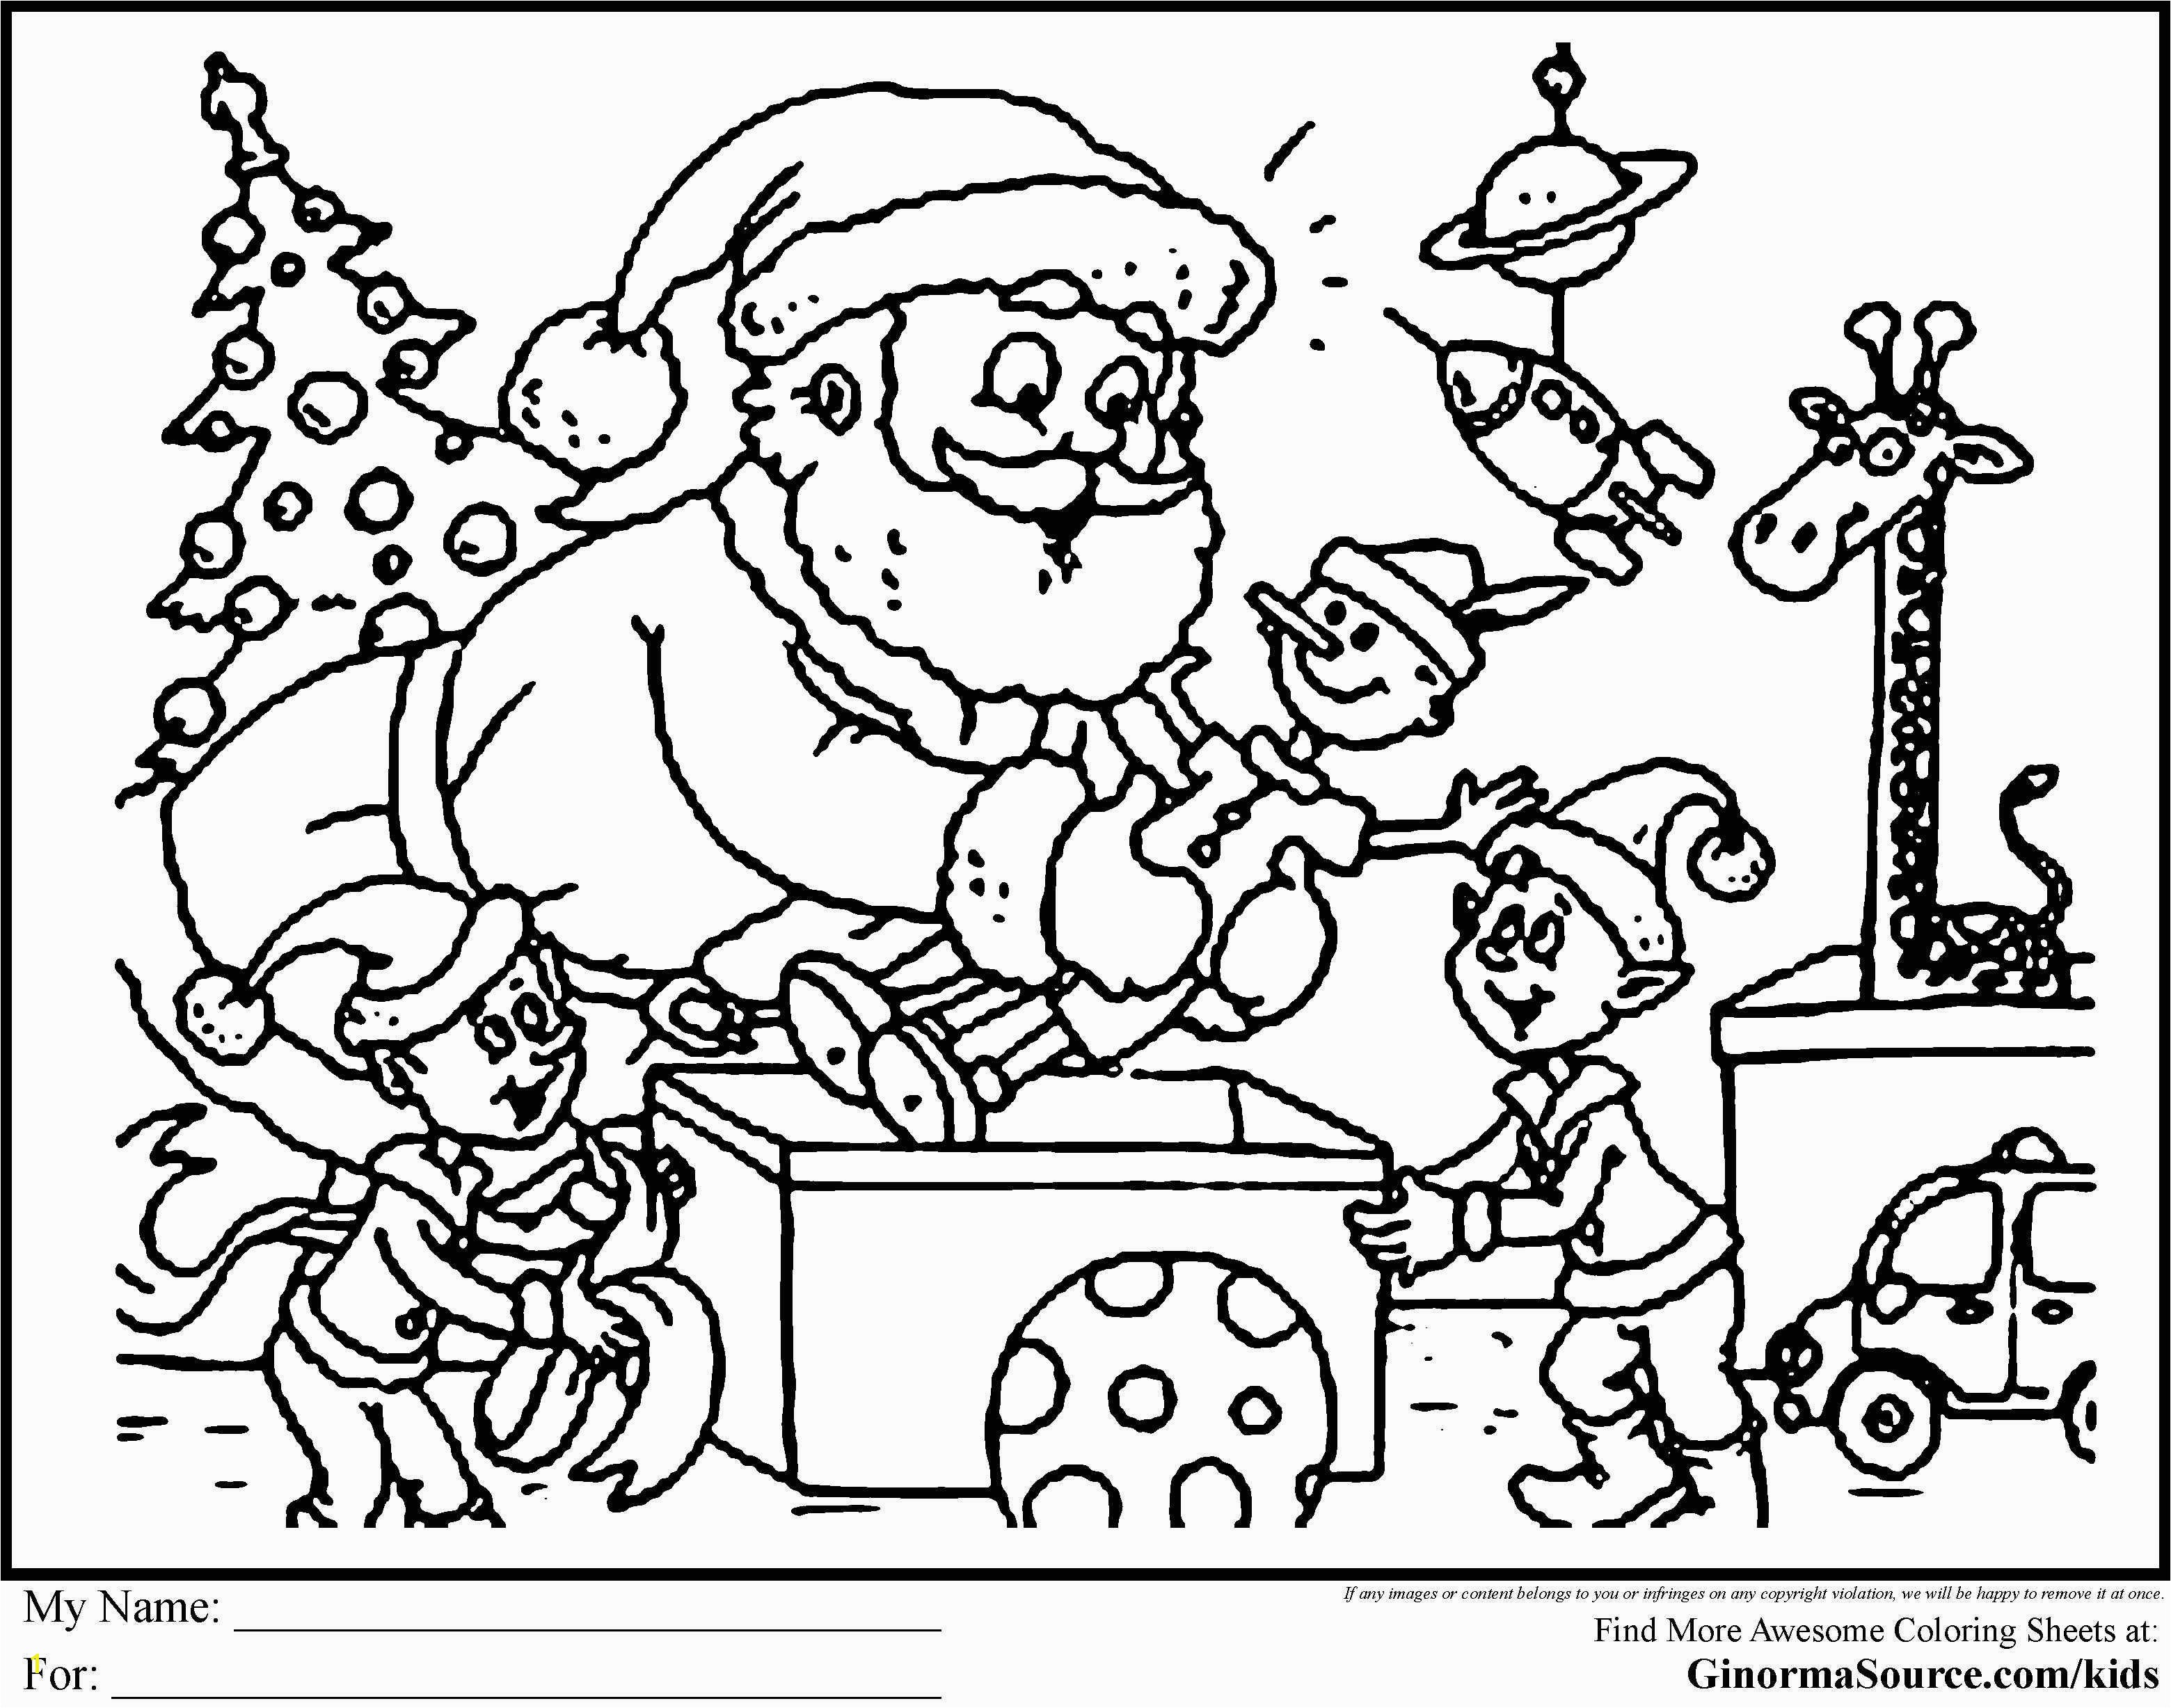 Coloring Pages for Print Inspirational Printable Cds 0d Coloring Page Luxury Coloring Pages for Christmas